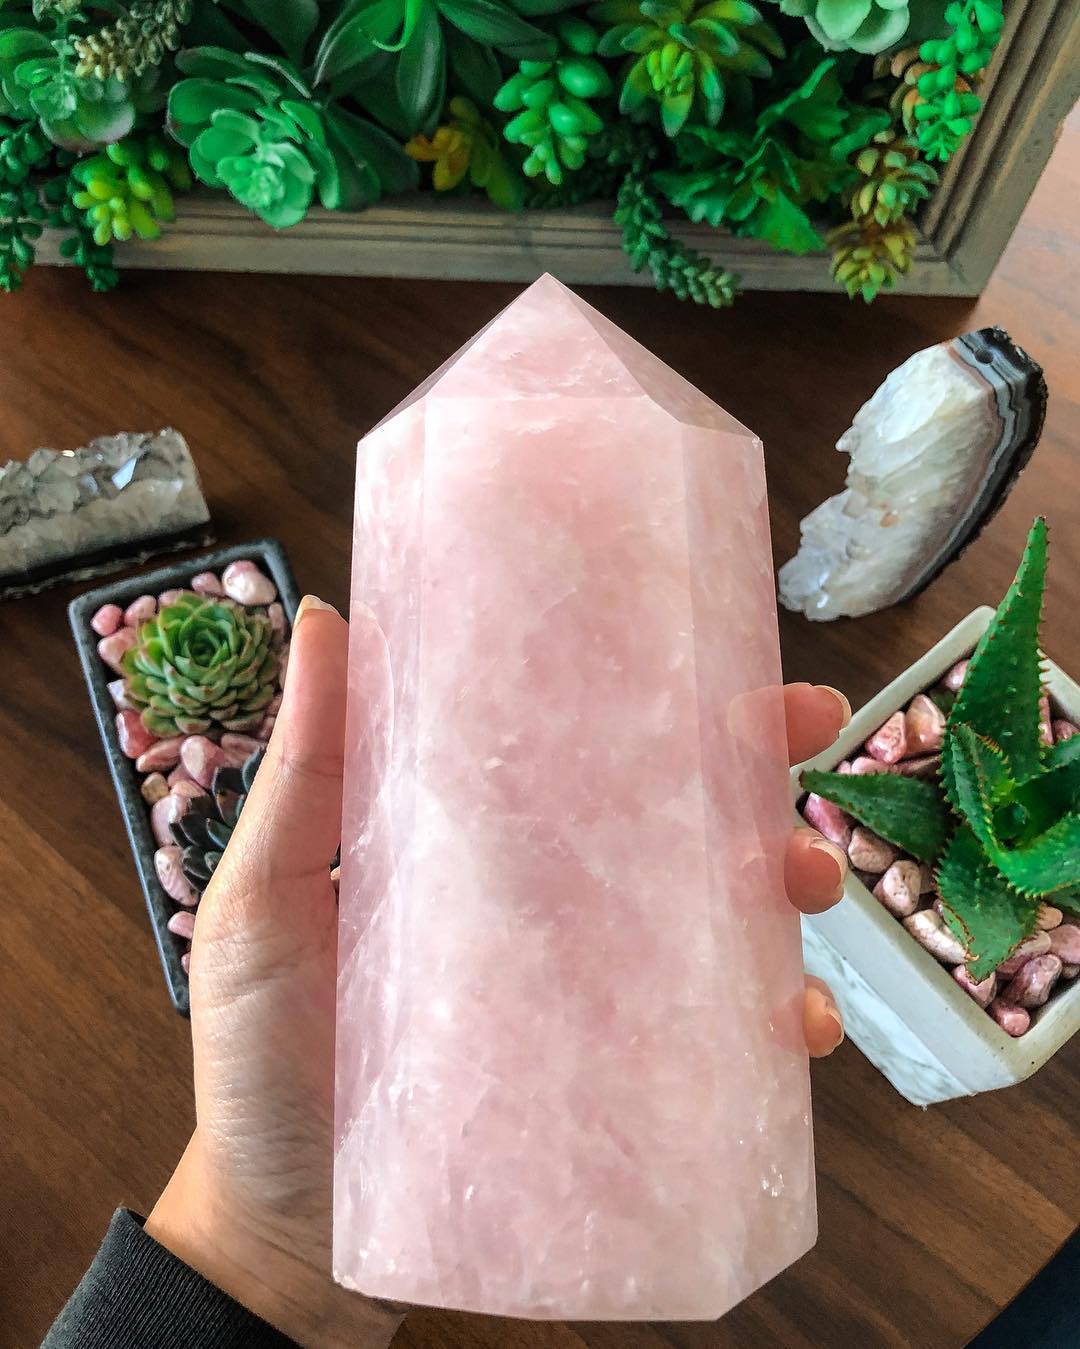 Rose Quartz Meaning and how to use. The love crystal